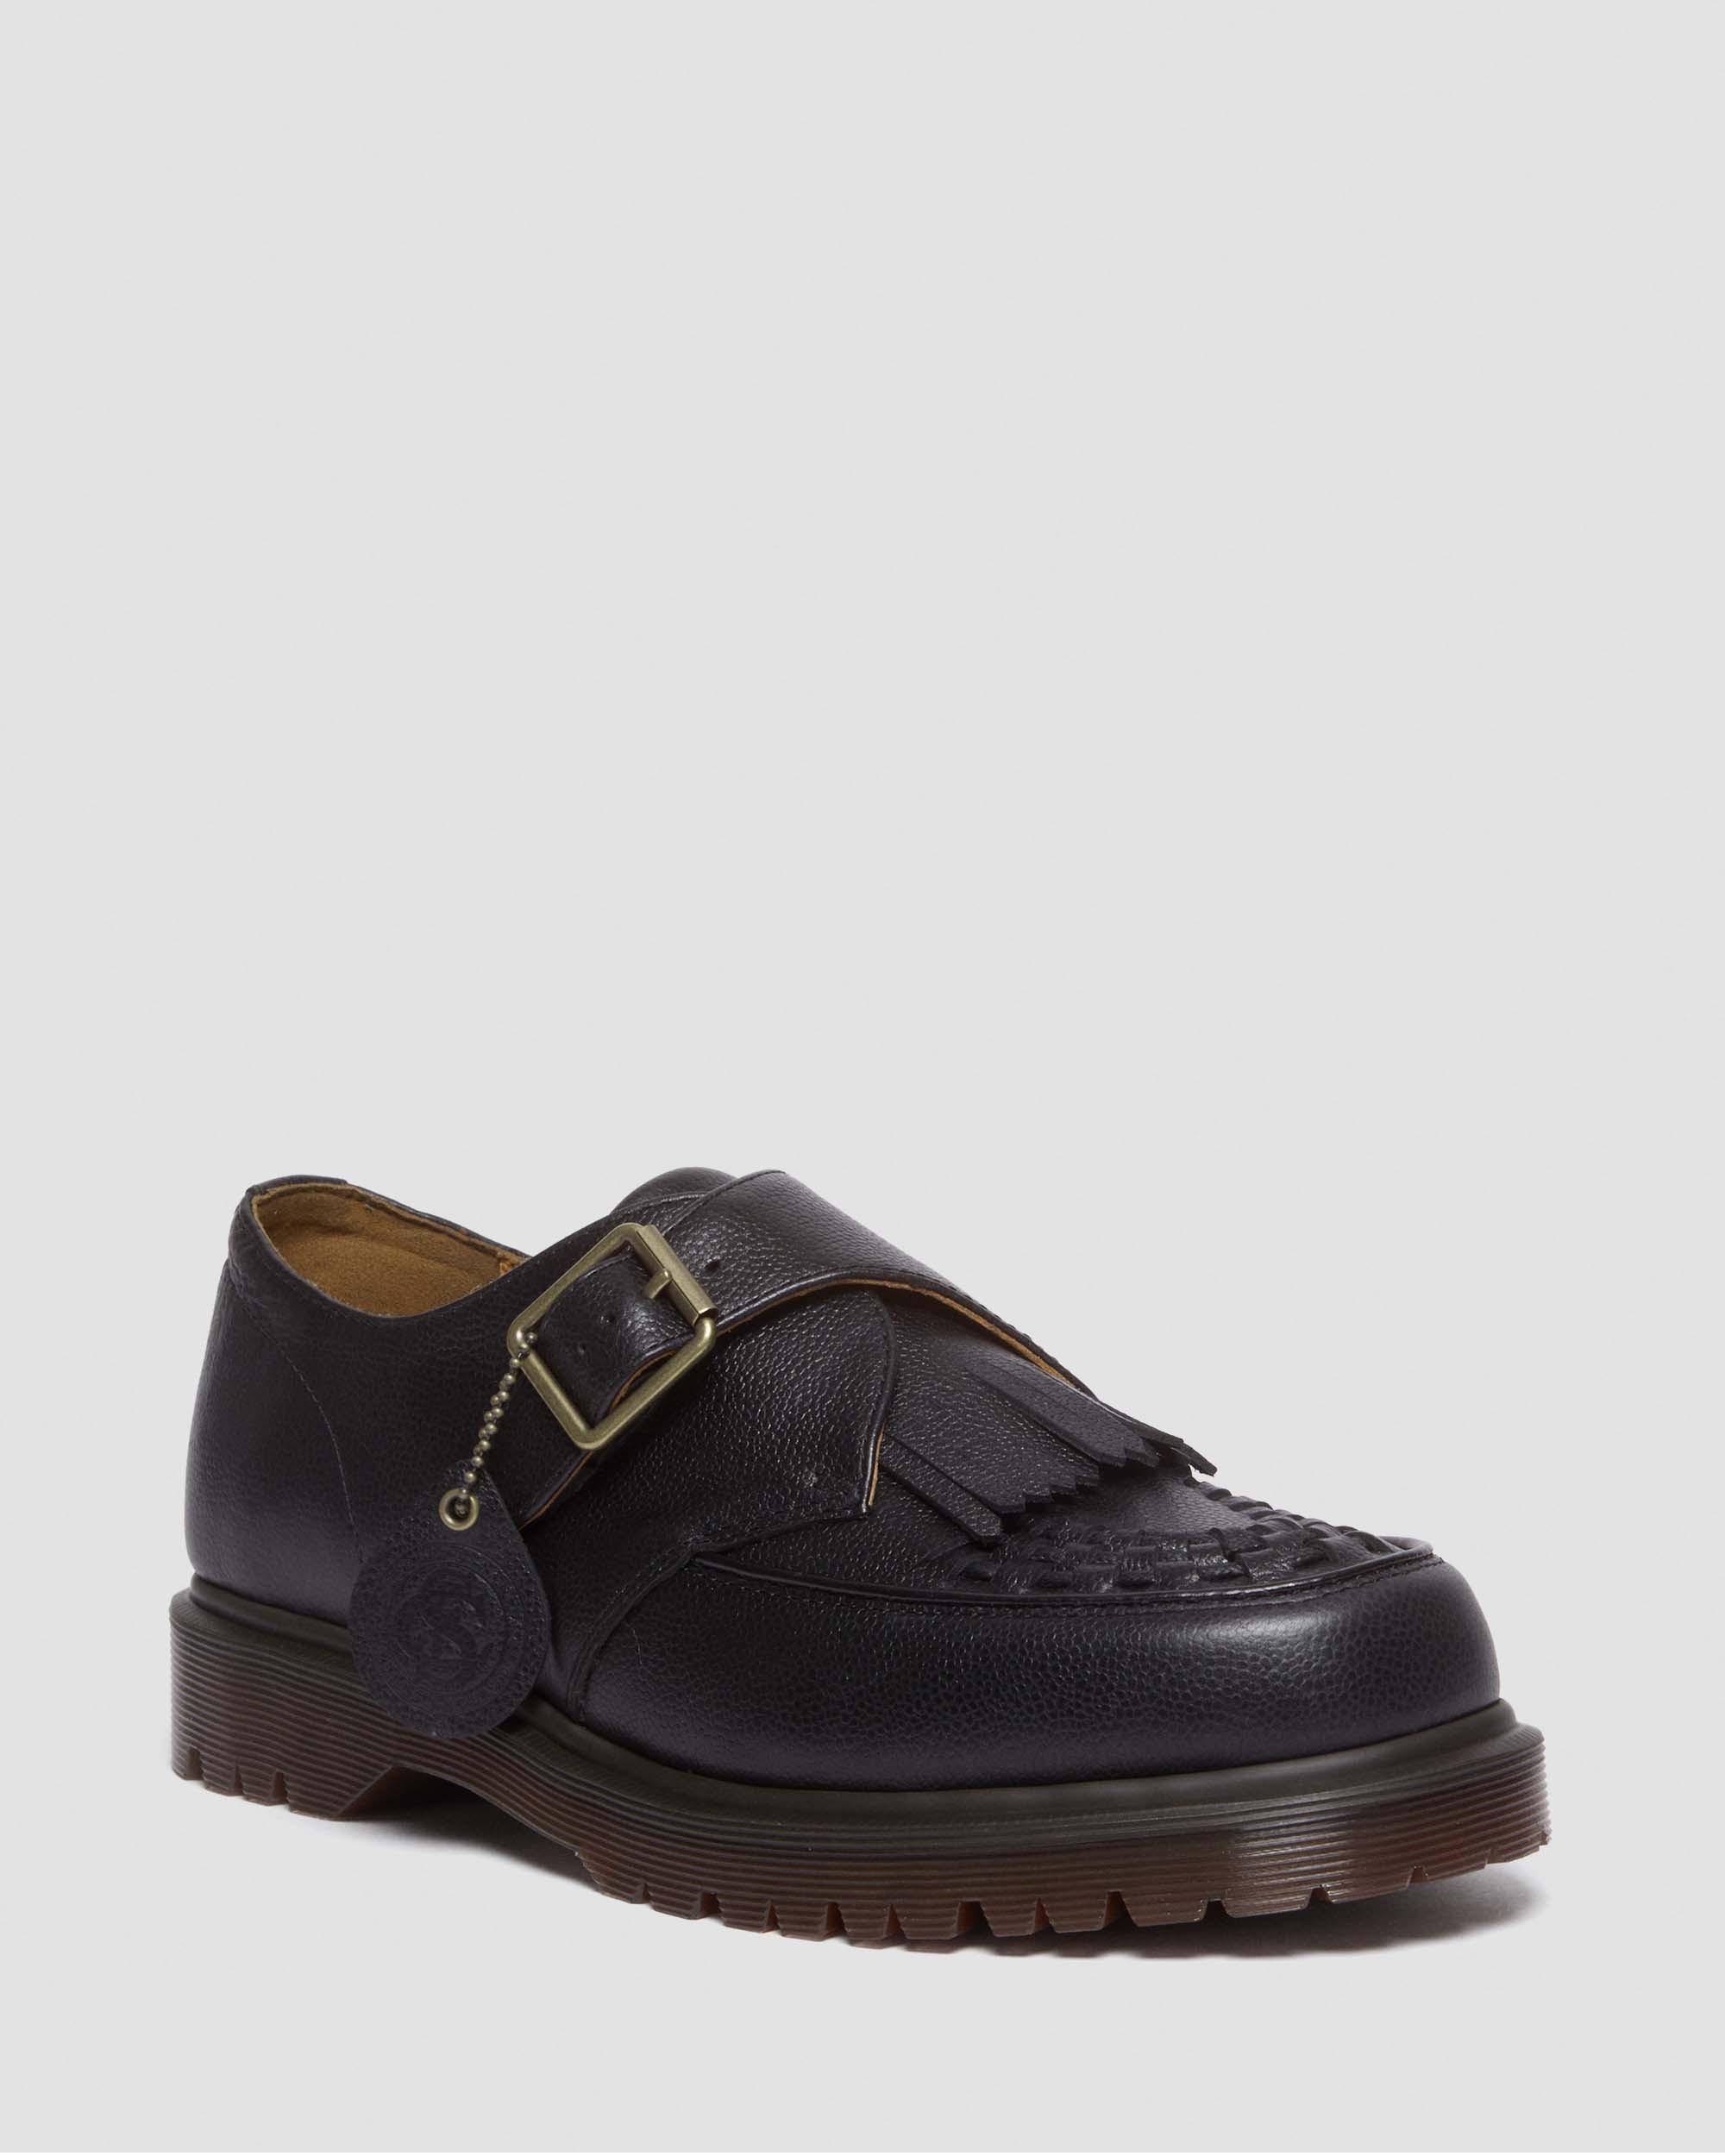 Dr. Martens' Ramsey Westminster Leather Buckle Creepers In Black